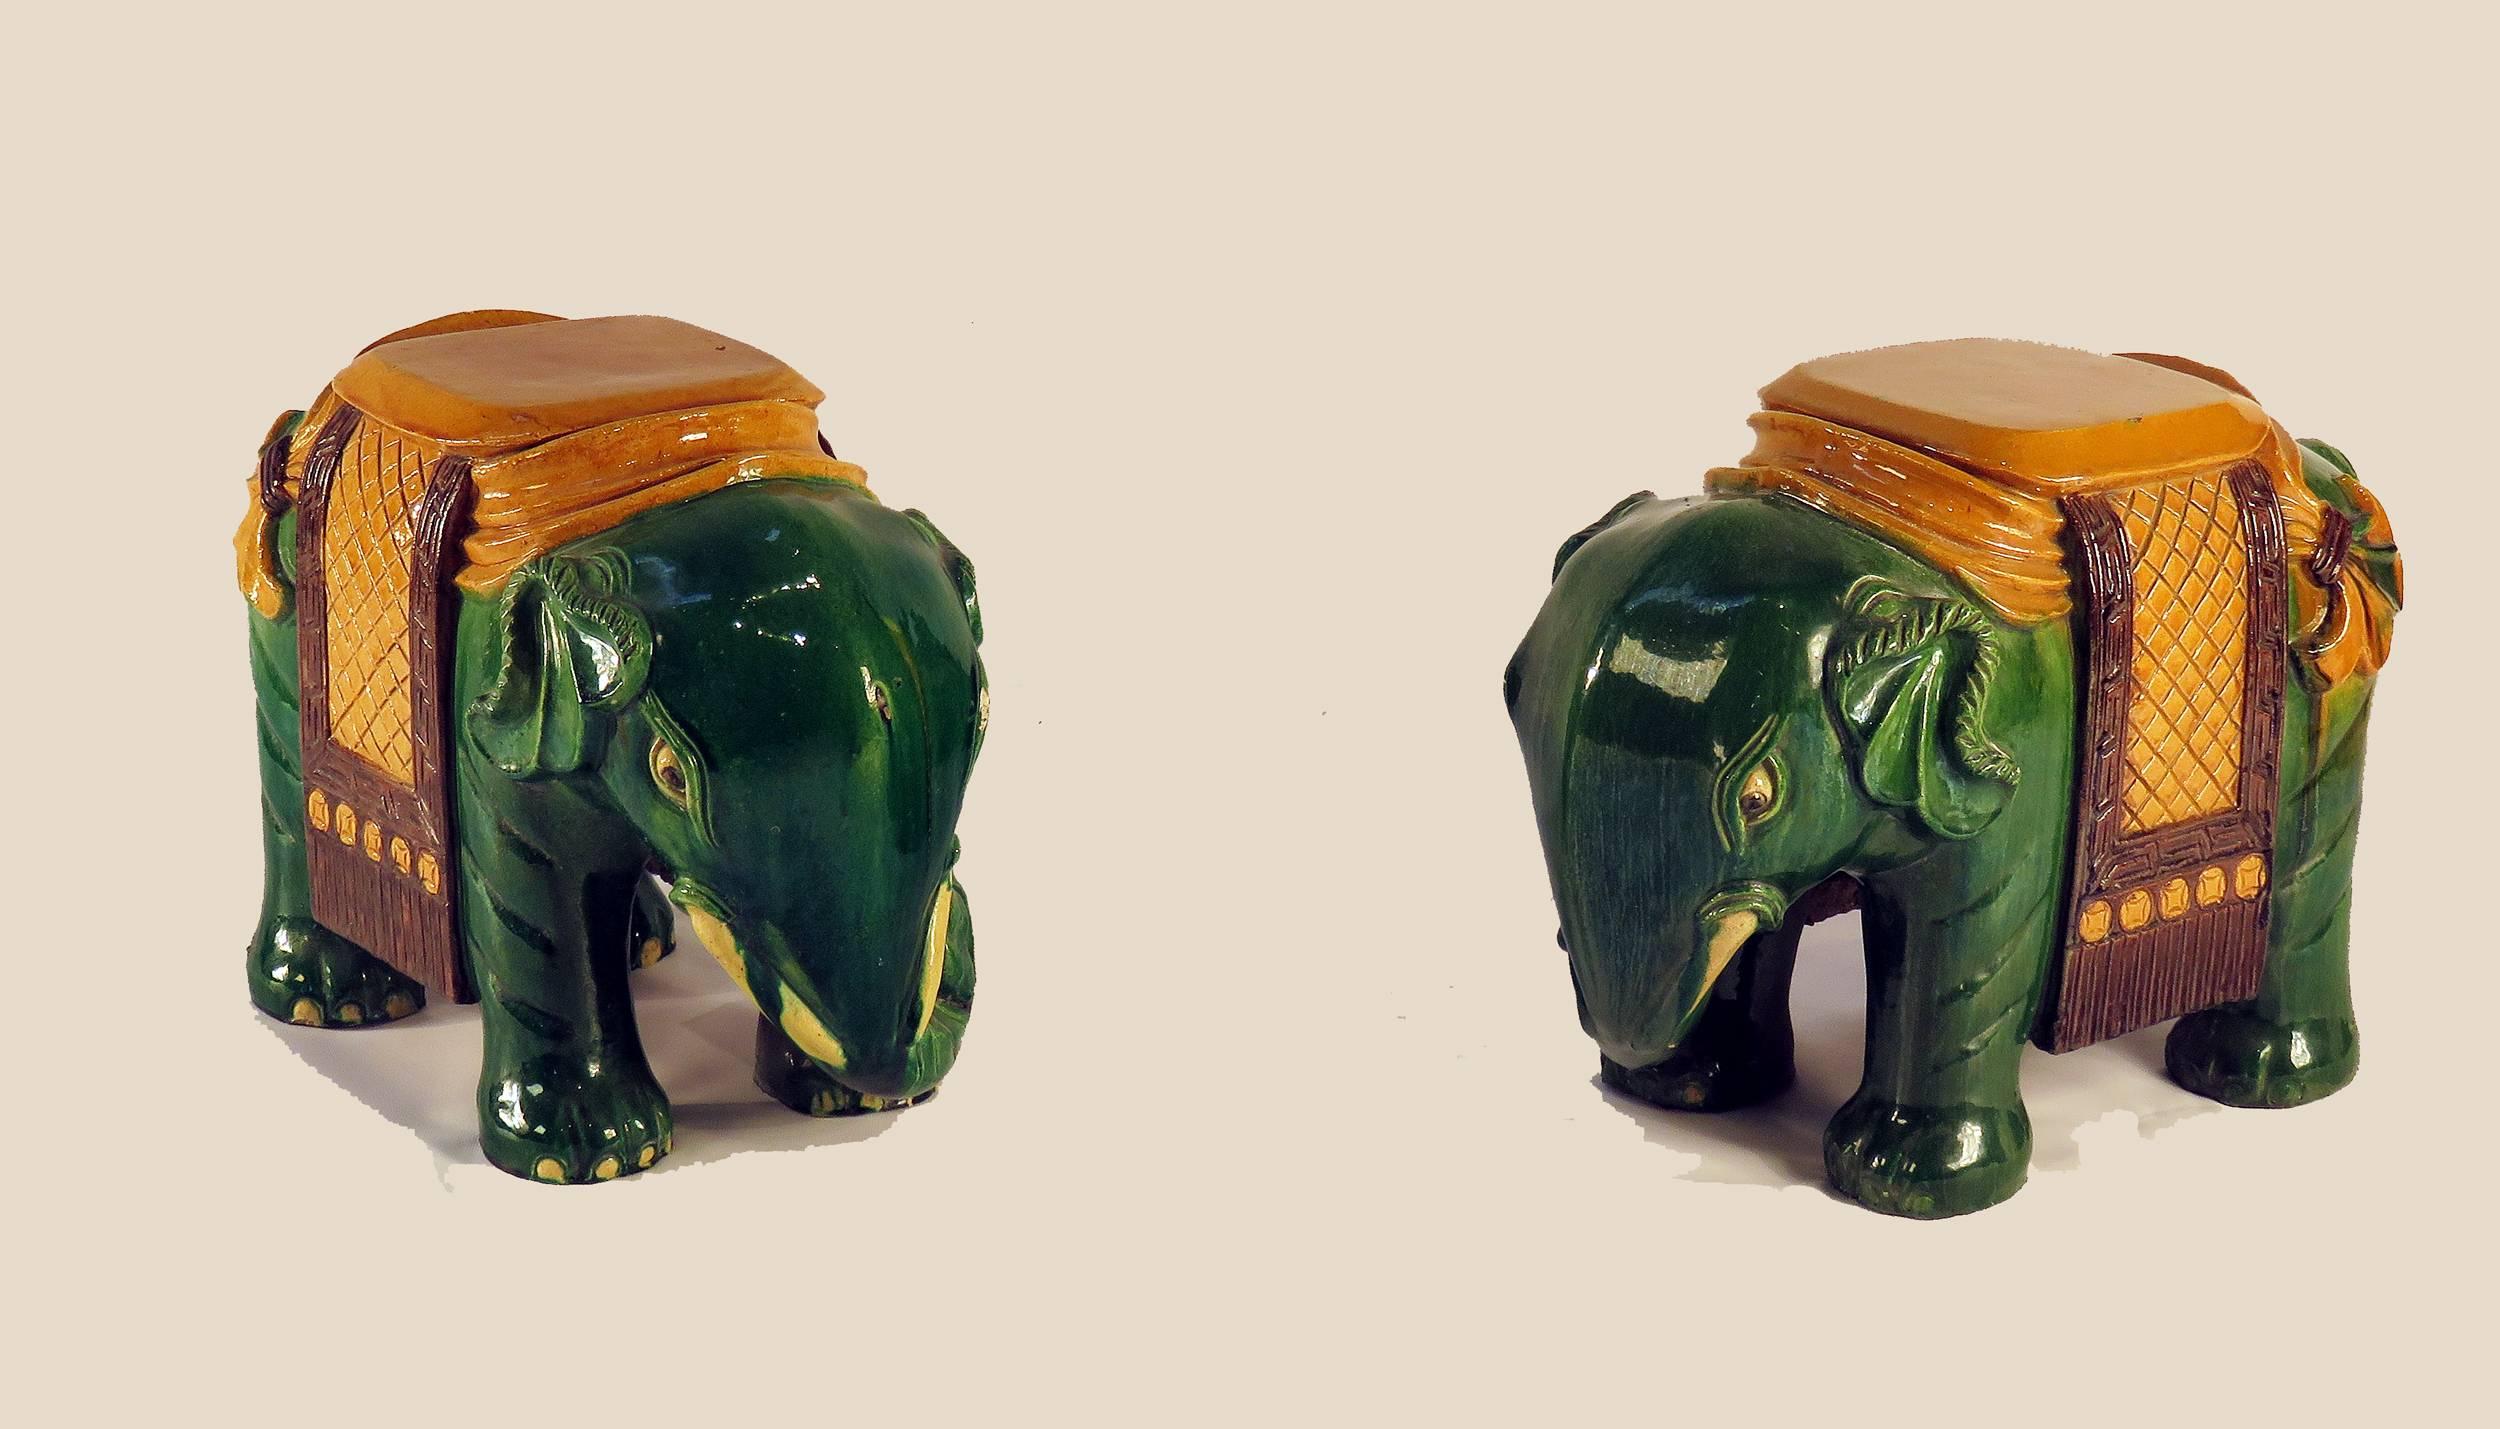 A very nice pair of Chinese Ching dynasty style green glazed elephant garden seats made circa 1930s. Exceptional iridescent green glaze with very nice crisp modeling.